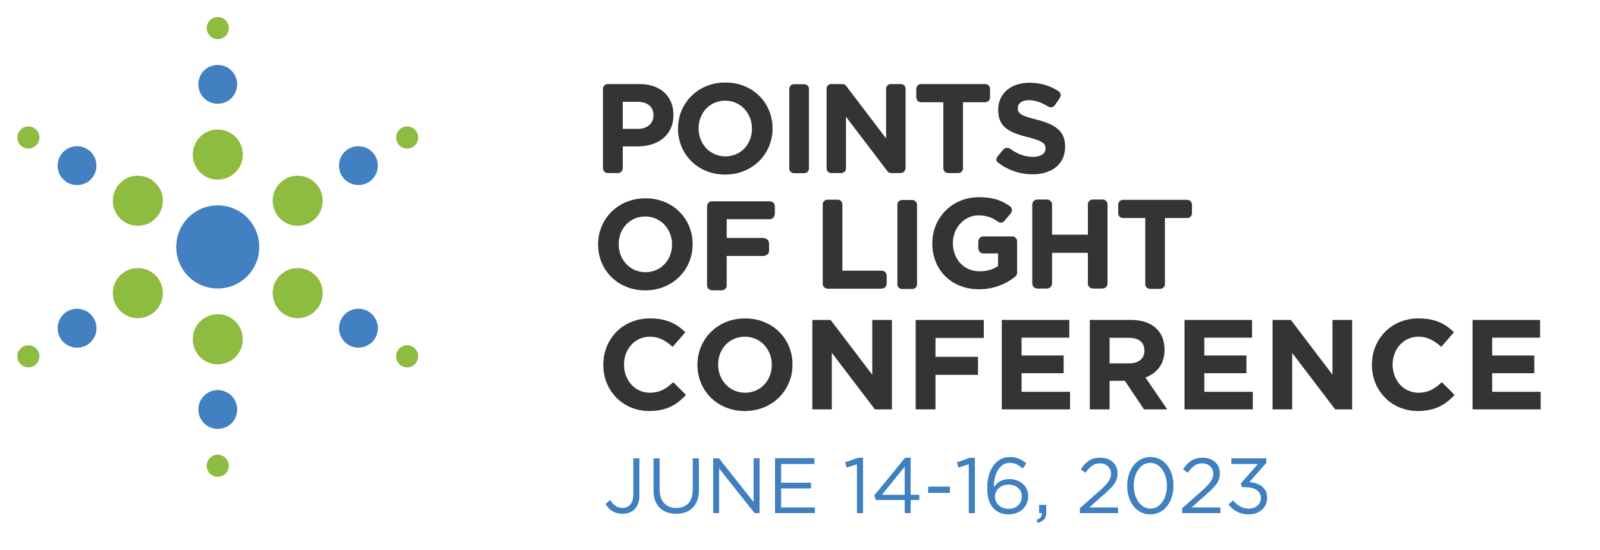 Points of Light Conference